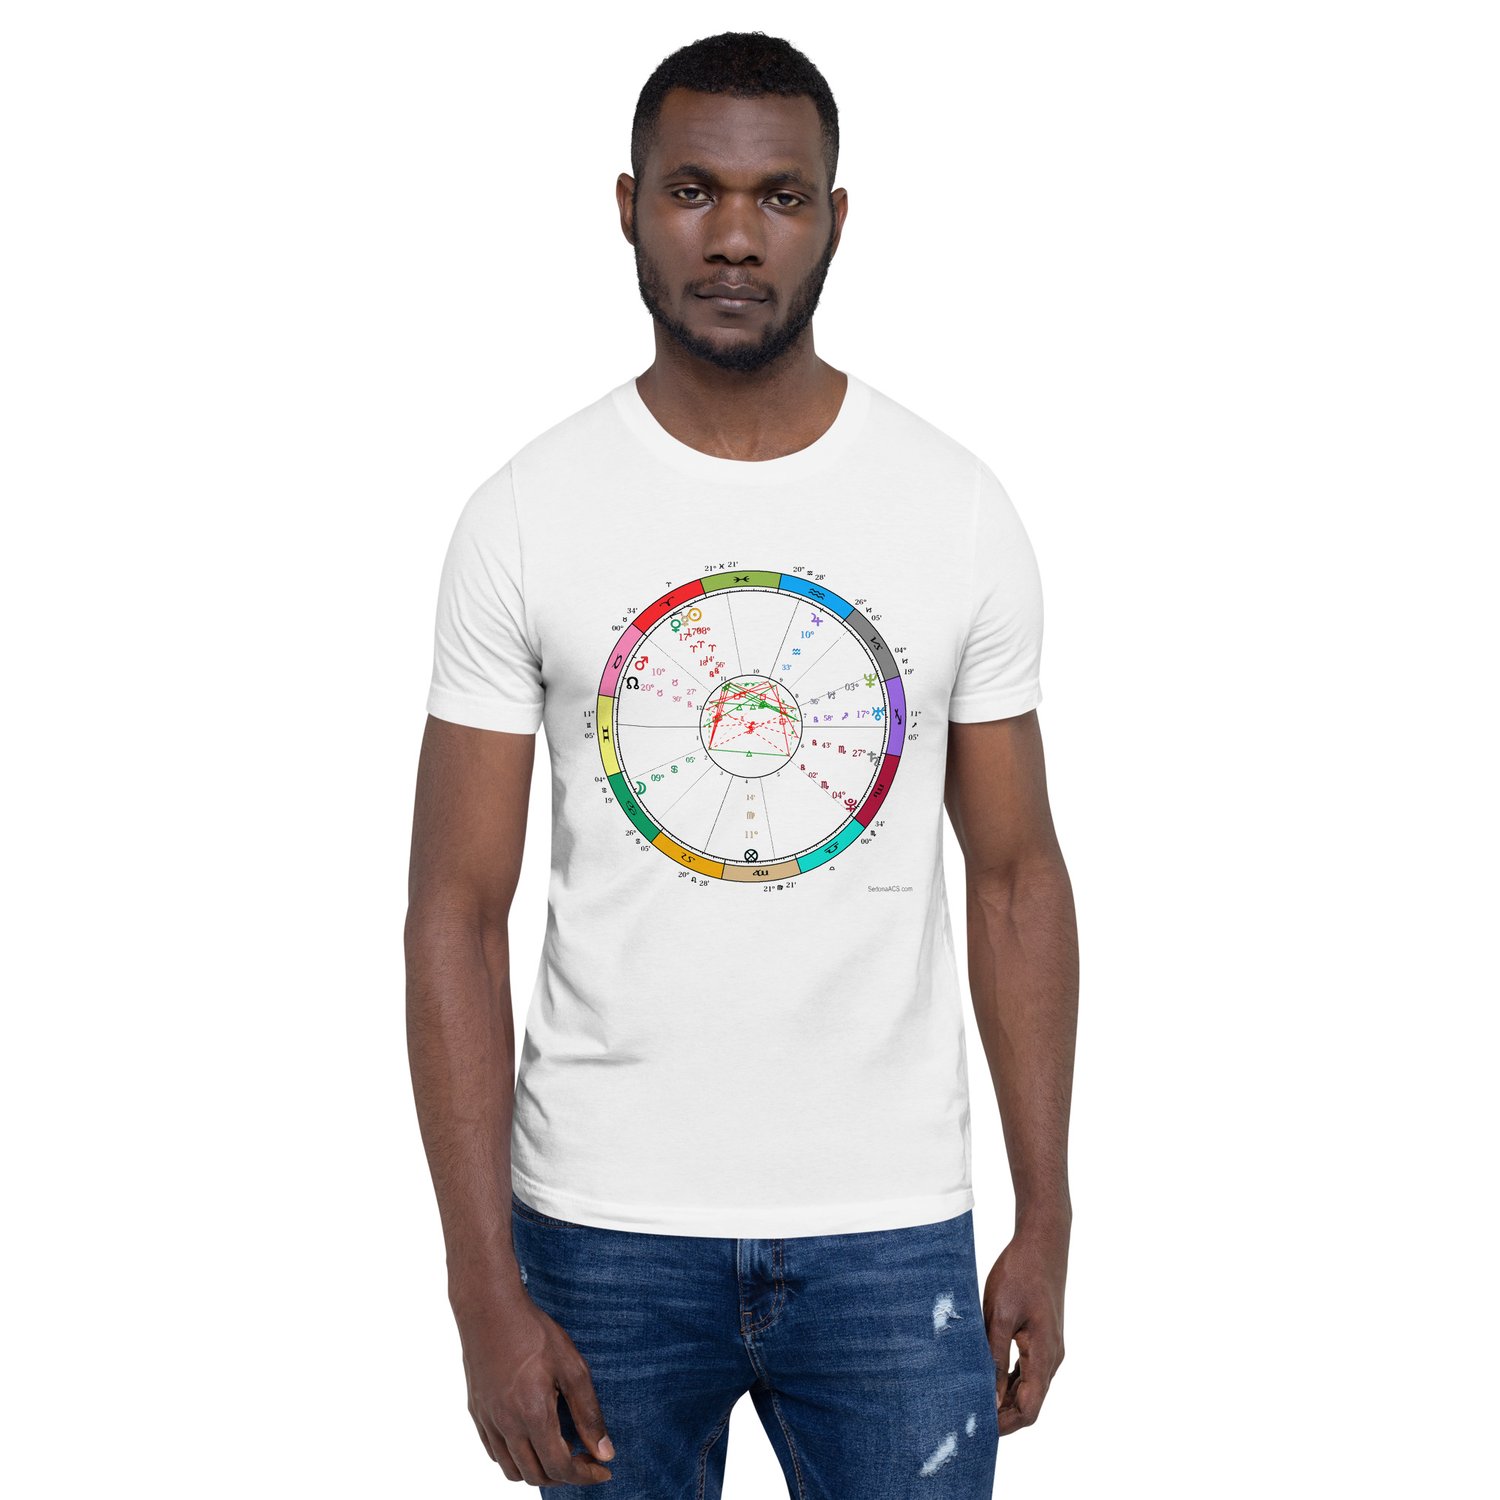 Image of Your Astrology Birth Chart Wheel only-Unisex t-shirt-white. Show your uniqueness!